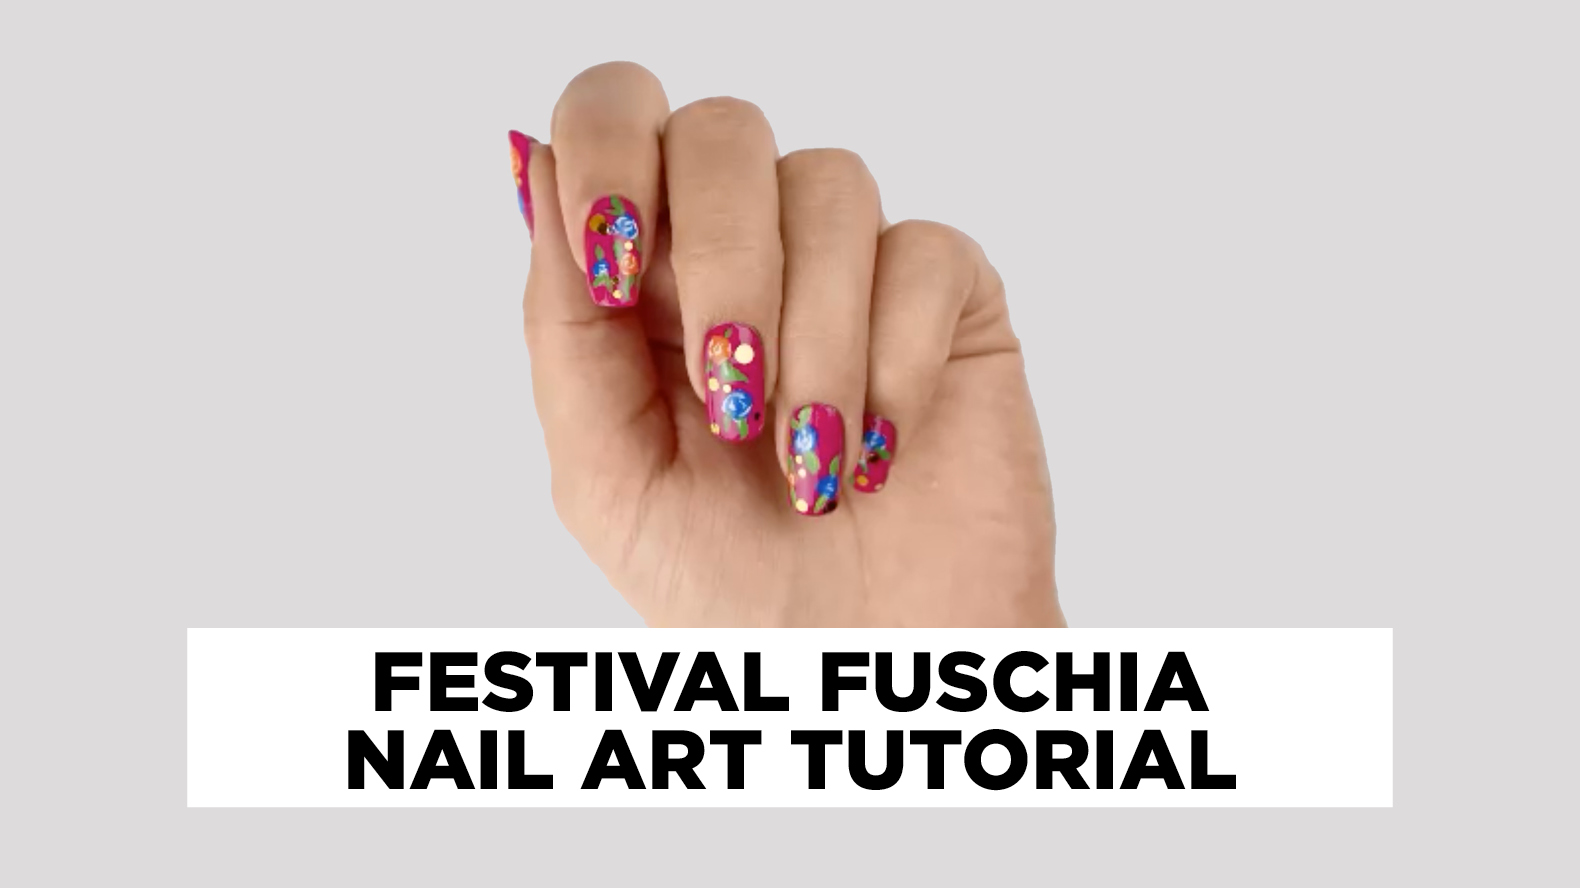 Incredible nail artistry showcased in under 60 seconds by Jessica Cosmetics